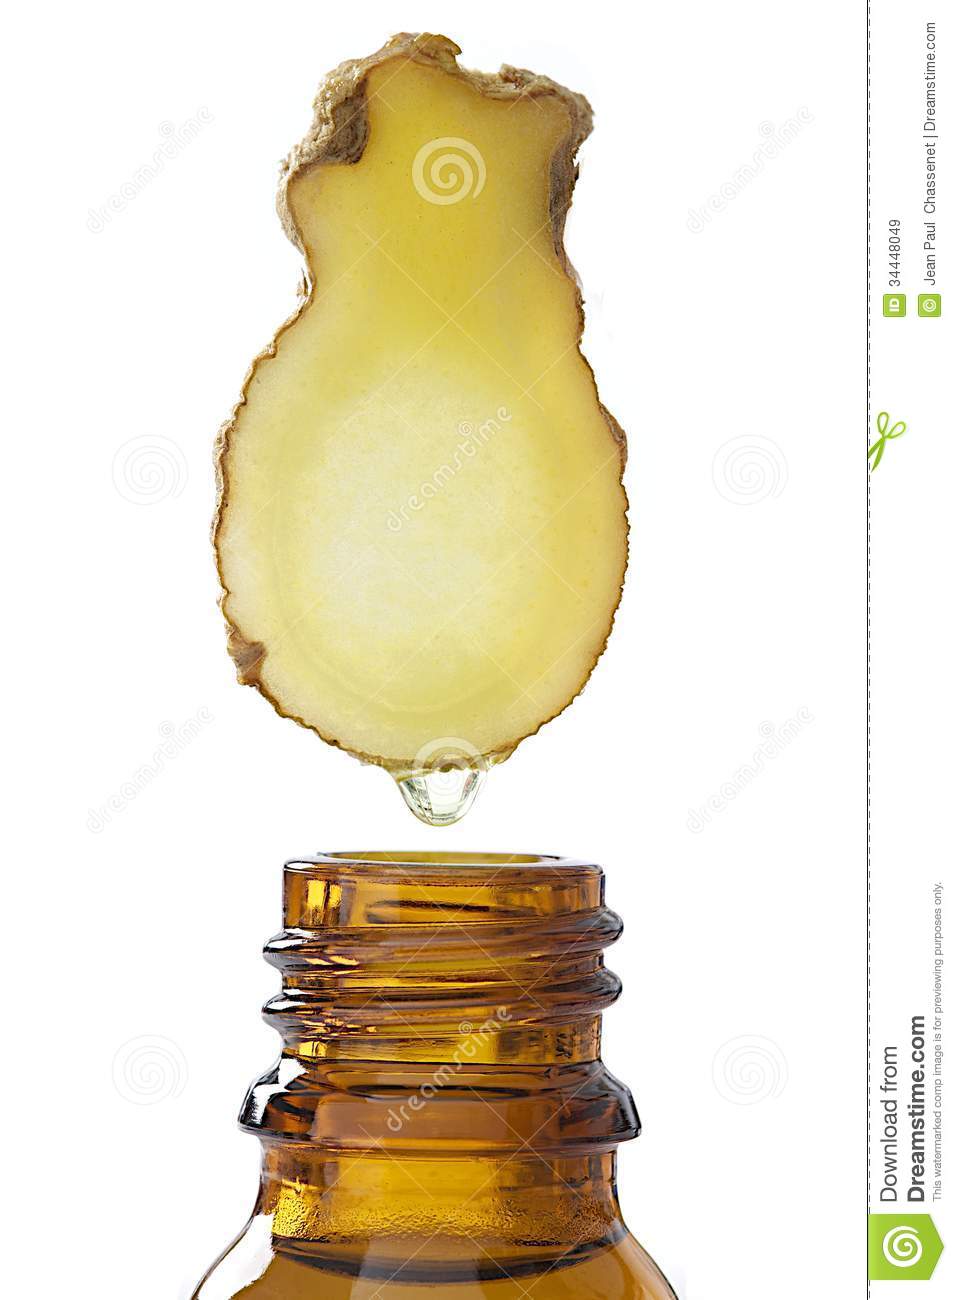 Ginger   Drop Essential Oil Falls Royalty Free Stock Images   Image    